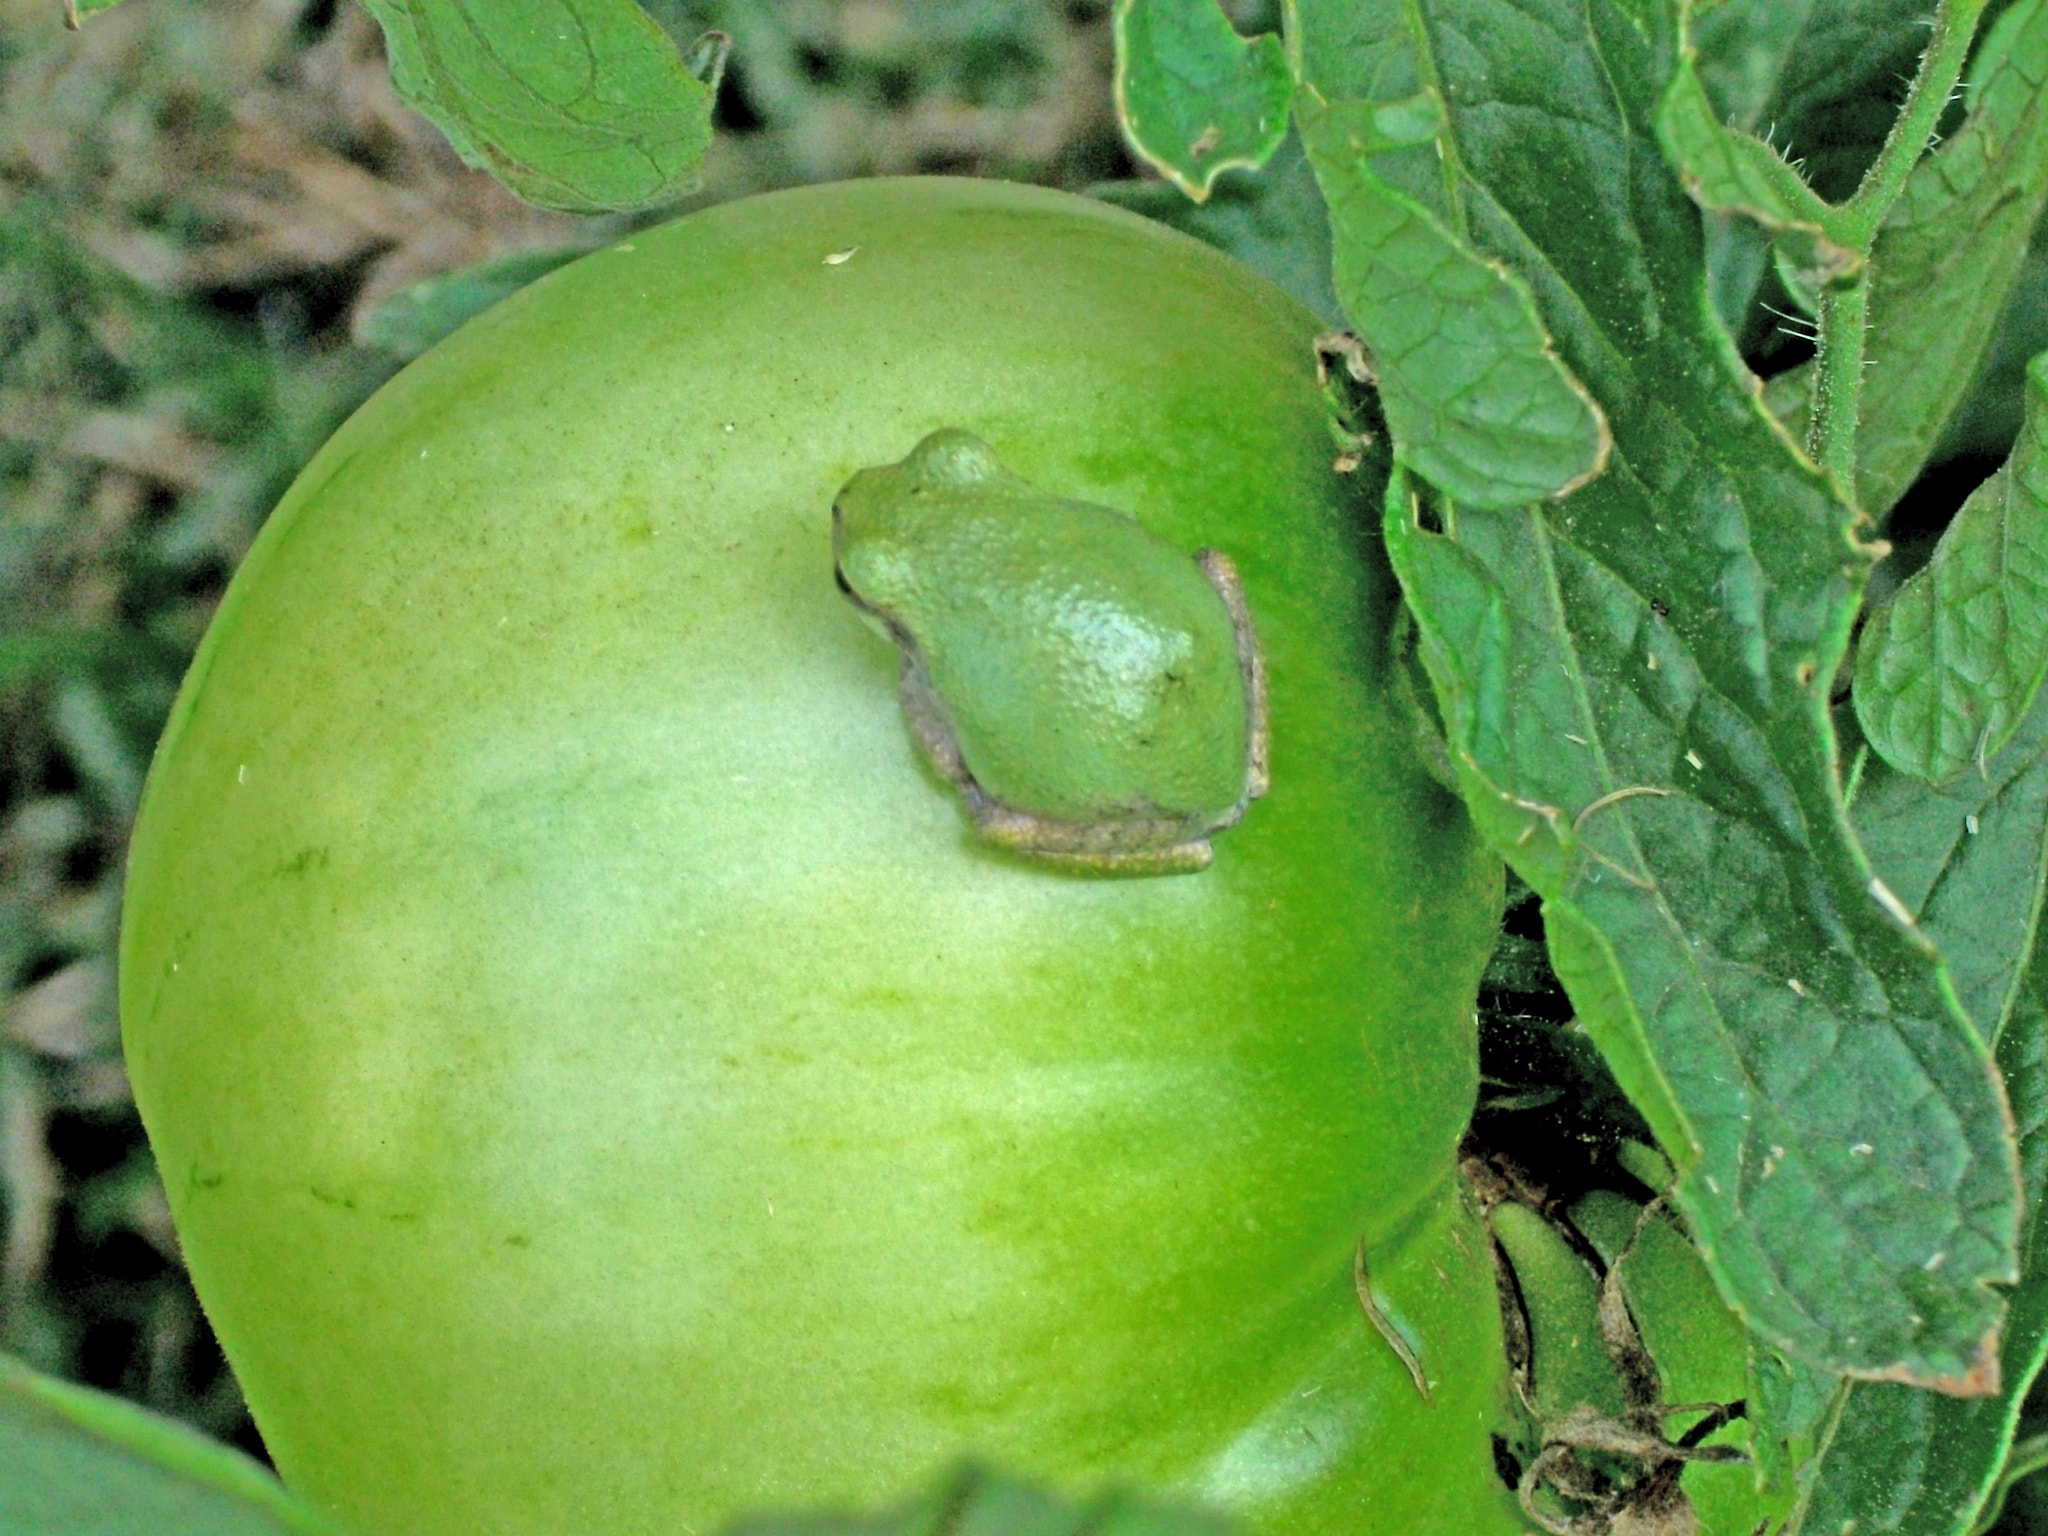 Fujifilm A220 A230 sample photo. Little frog on tomato photography